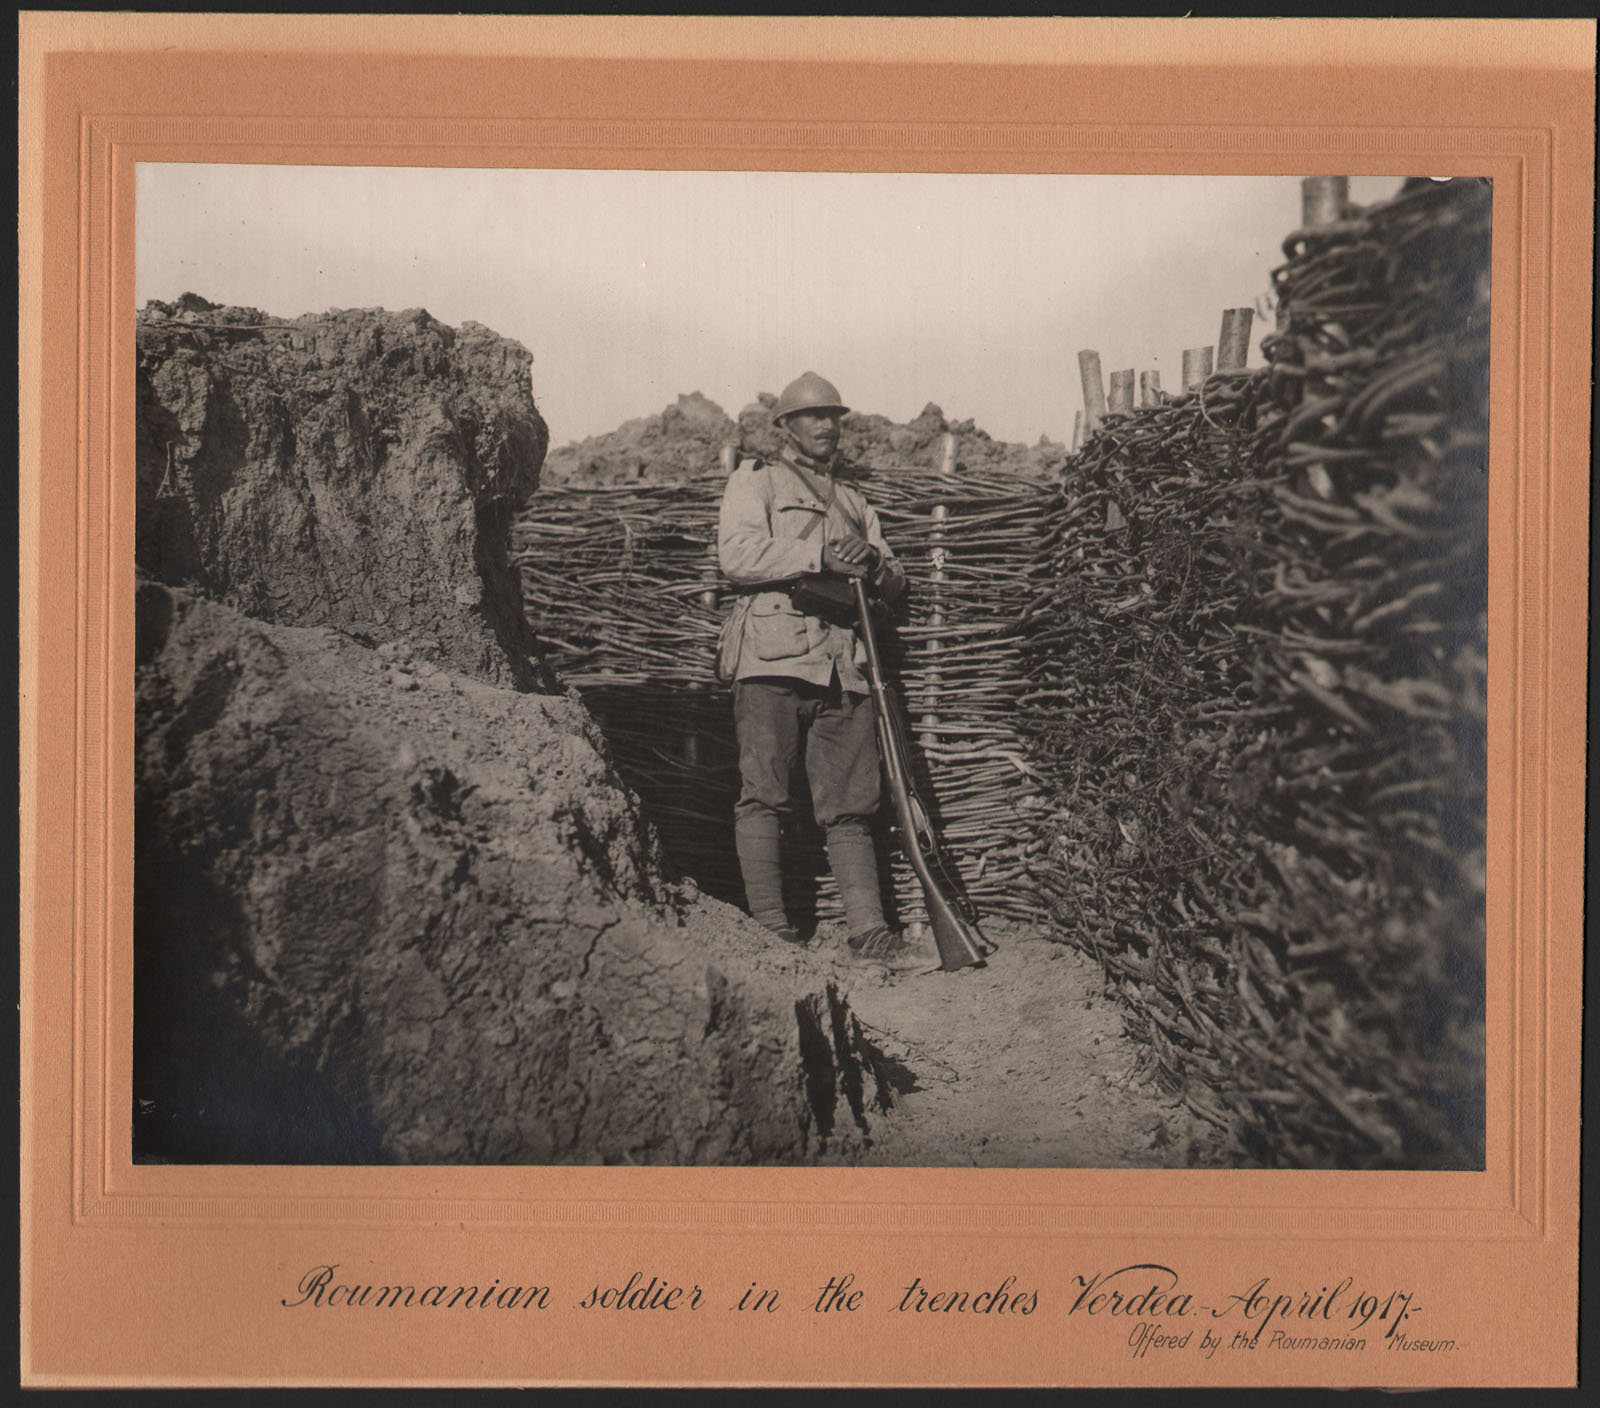 Black and white photograph of a soldier in uniform holding a broom, standing in a trench.